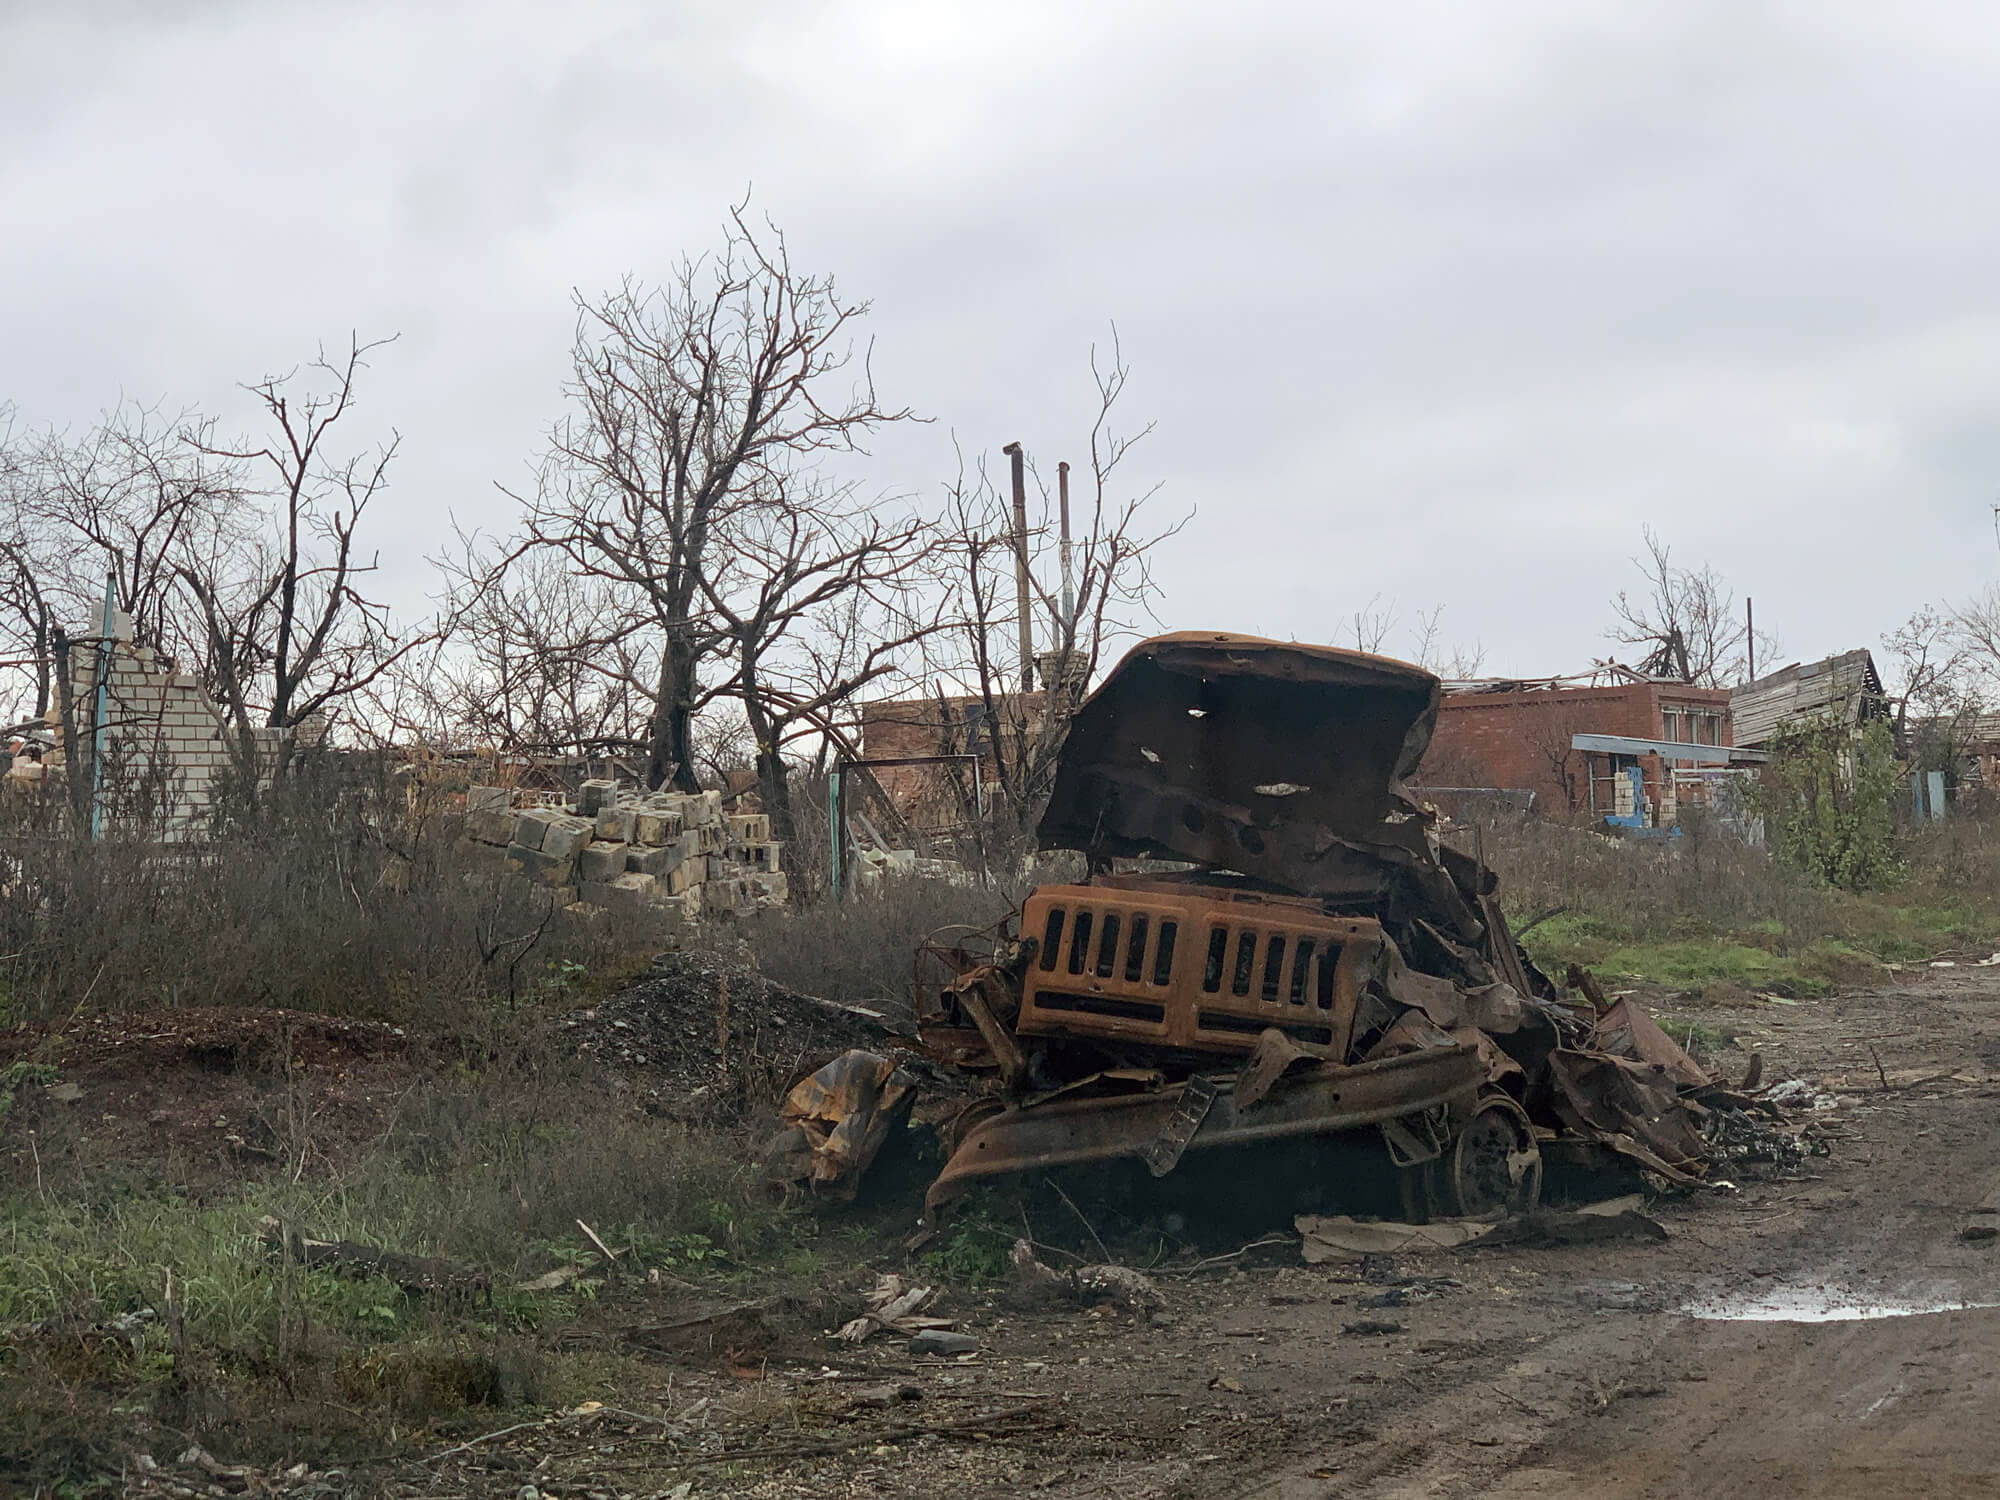 Roads that were once lined with trees in Dovgenke village now contain the remains of military trucks destroyed in battle.